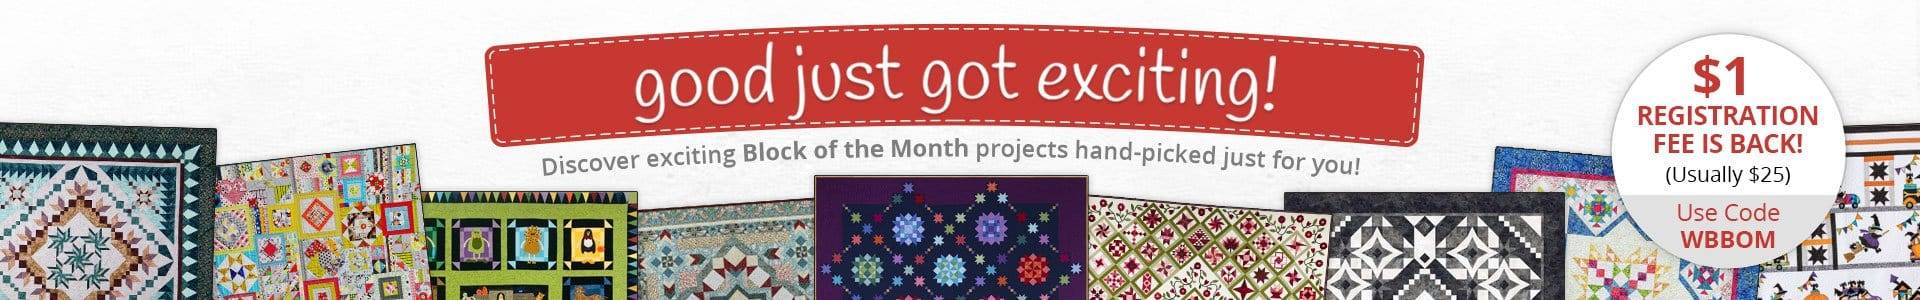 Block of the month header image